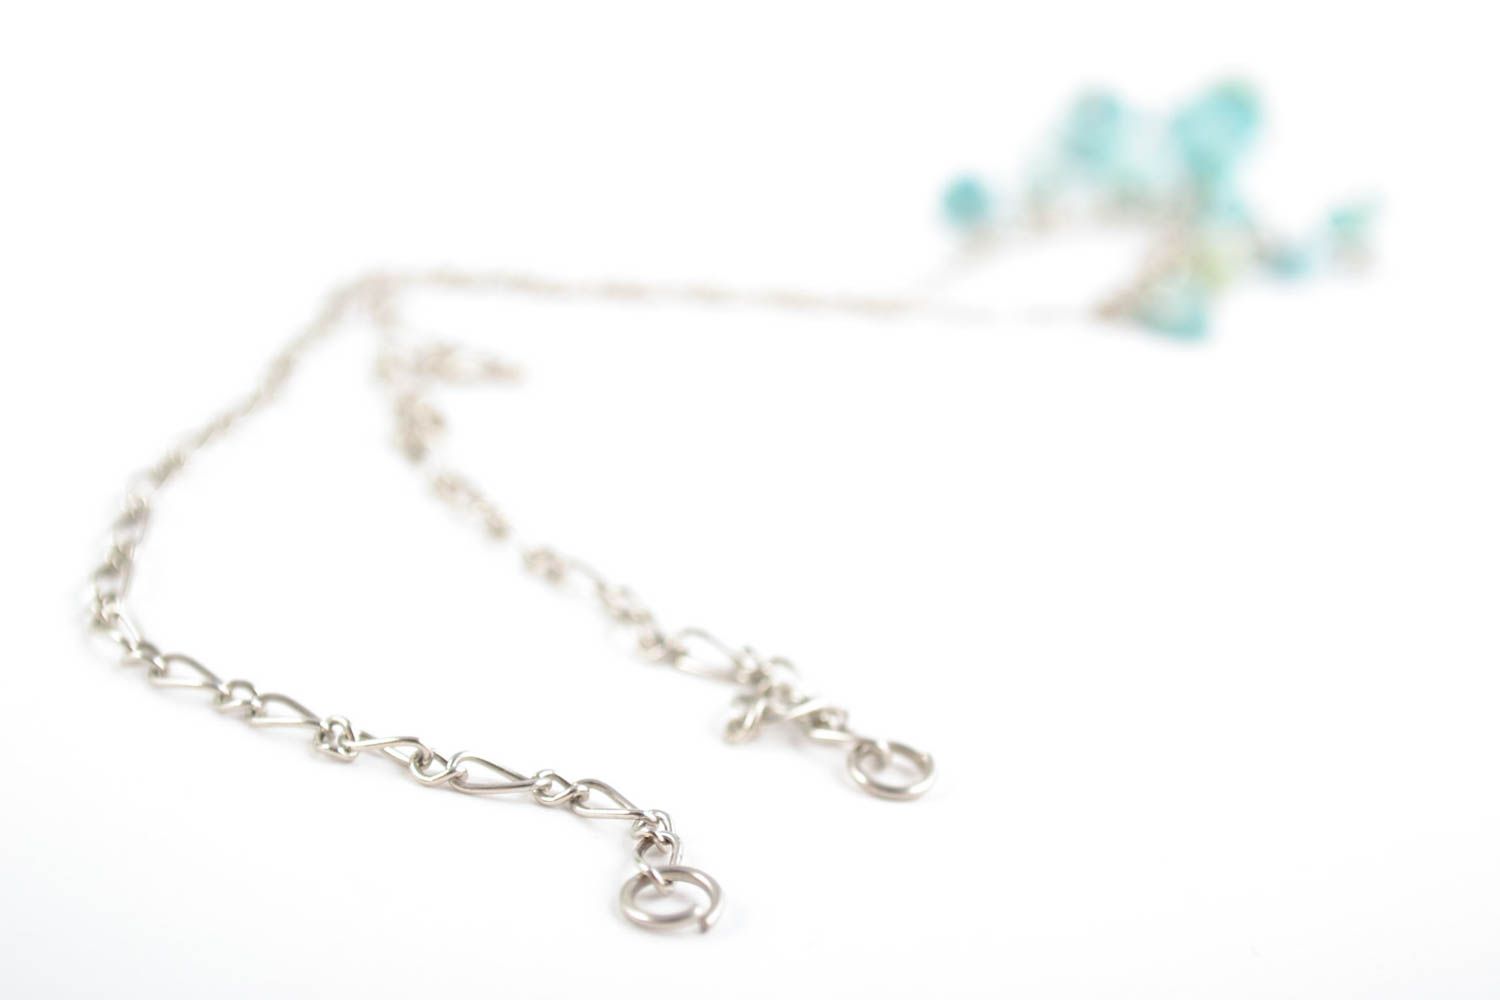 Handmade tender necklace with amazonite stones of turquoise color on metal chain photo 4